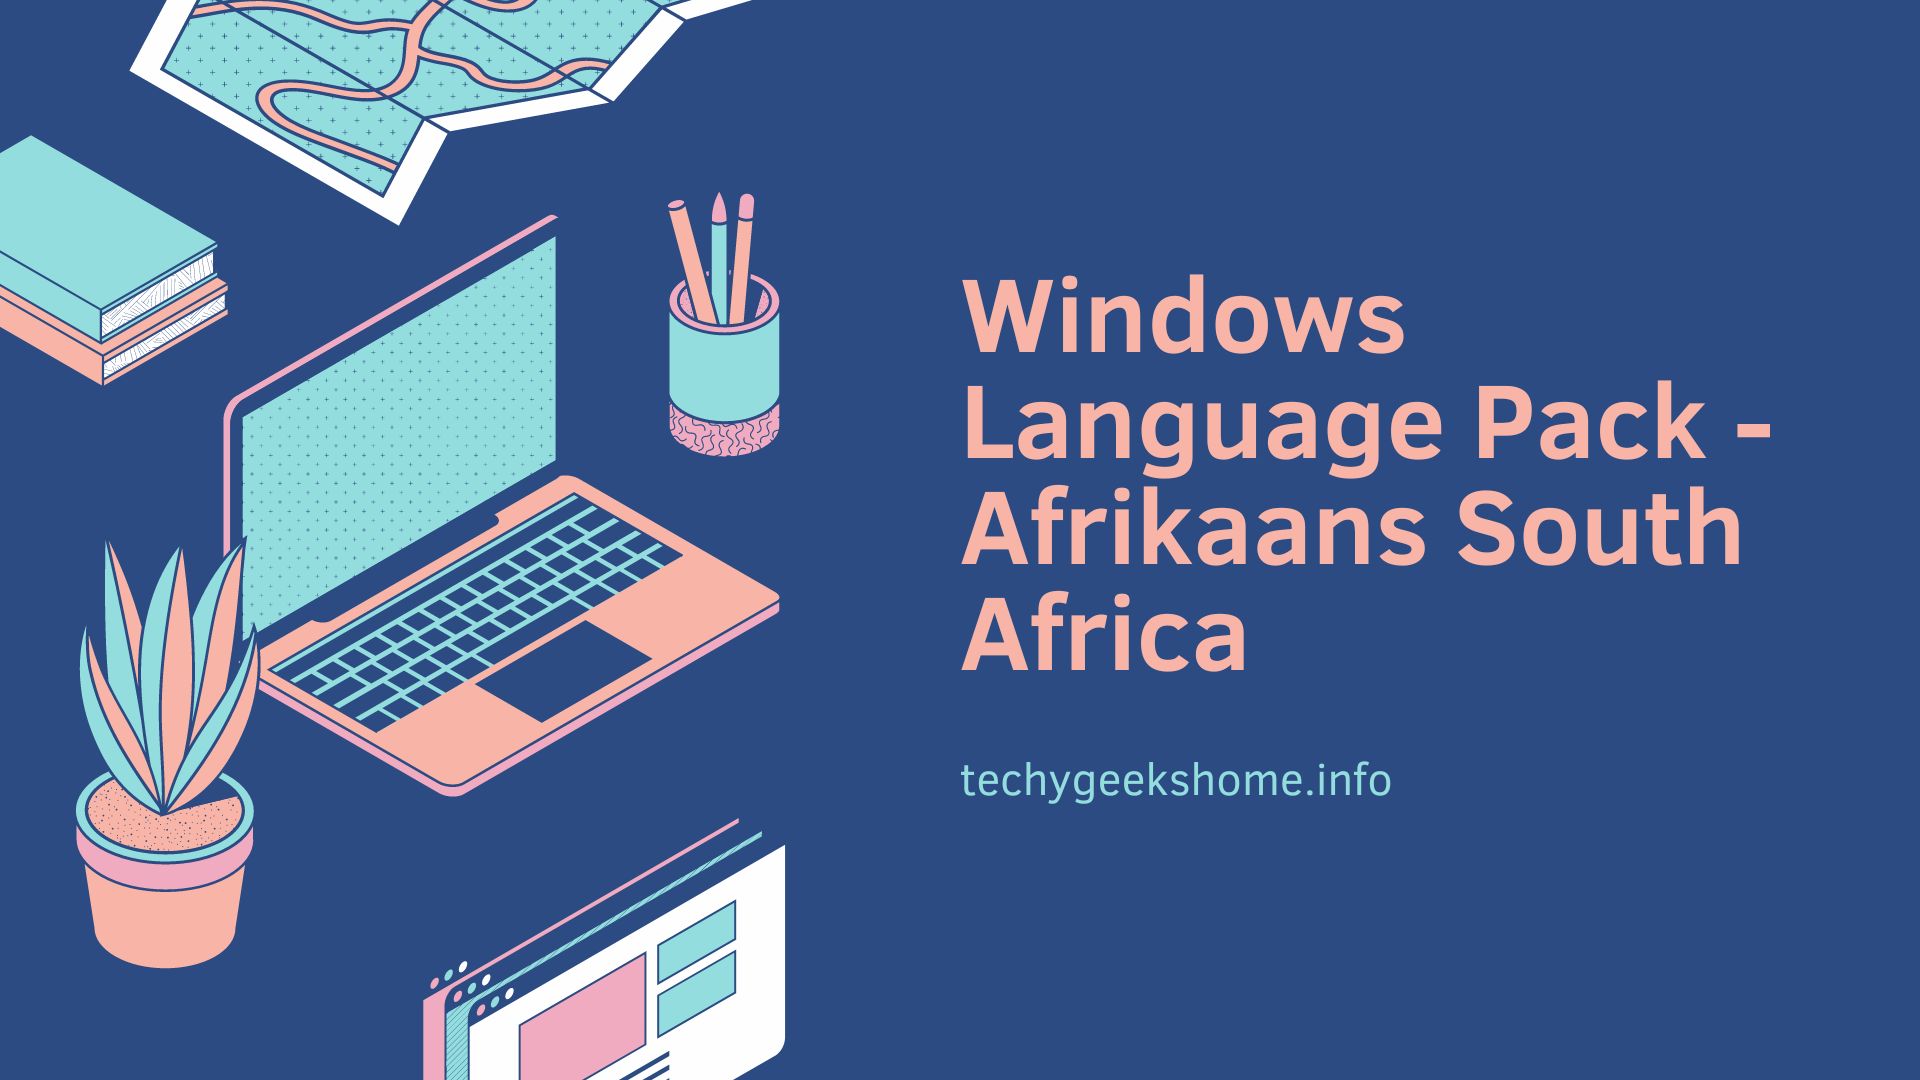 Windows Language Pack - Afrikaans South Africa